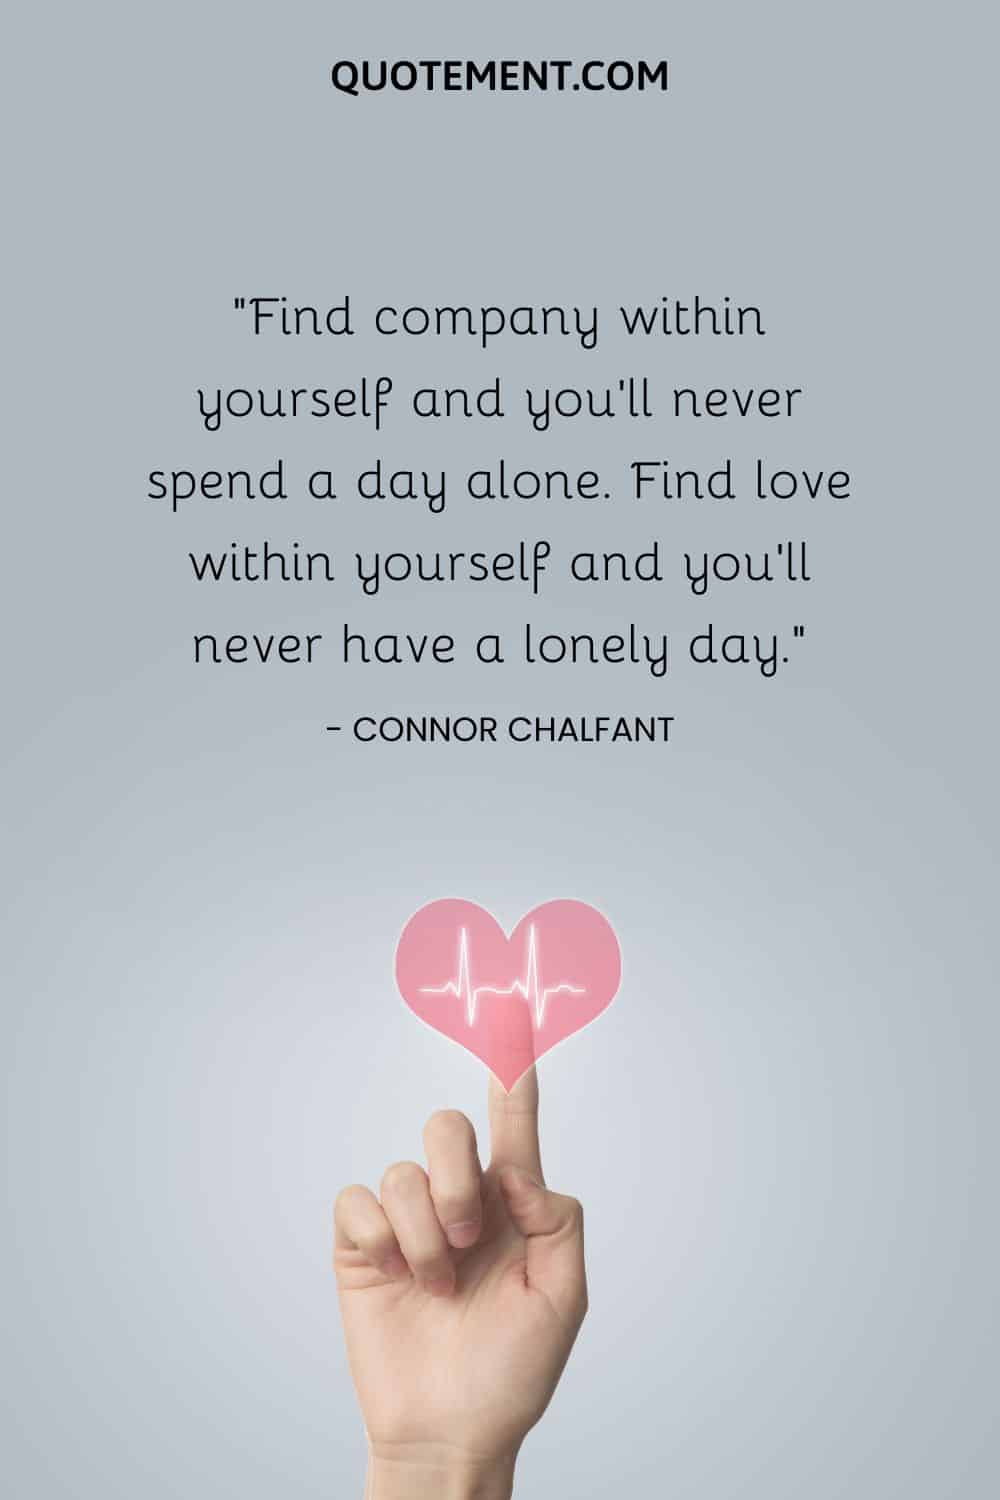 Find company within yourself and you’ll never spend a day alone